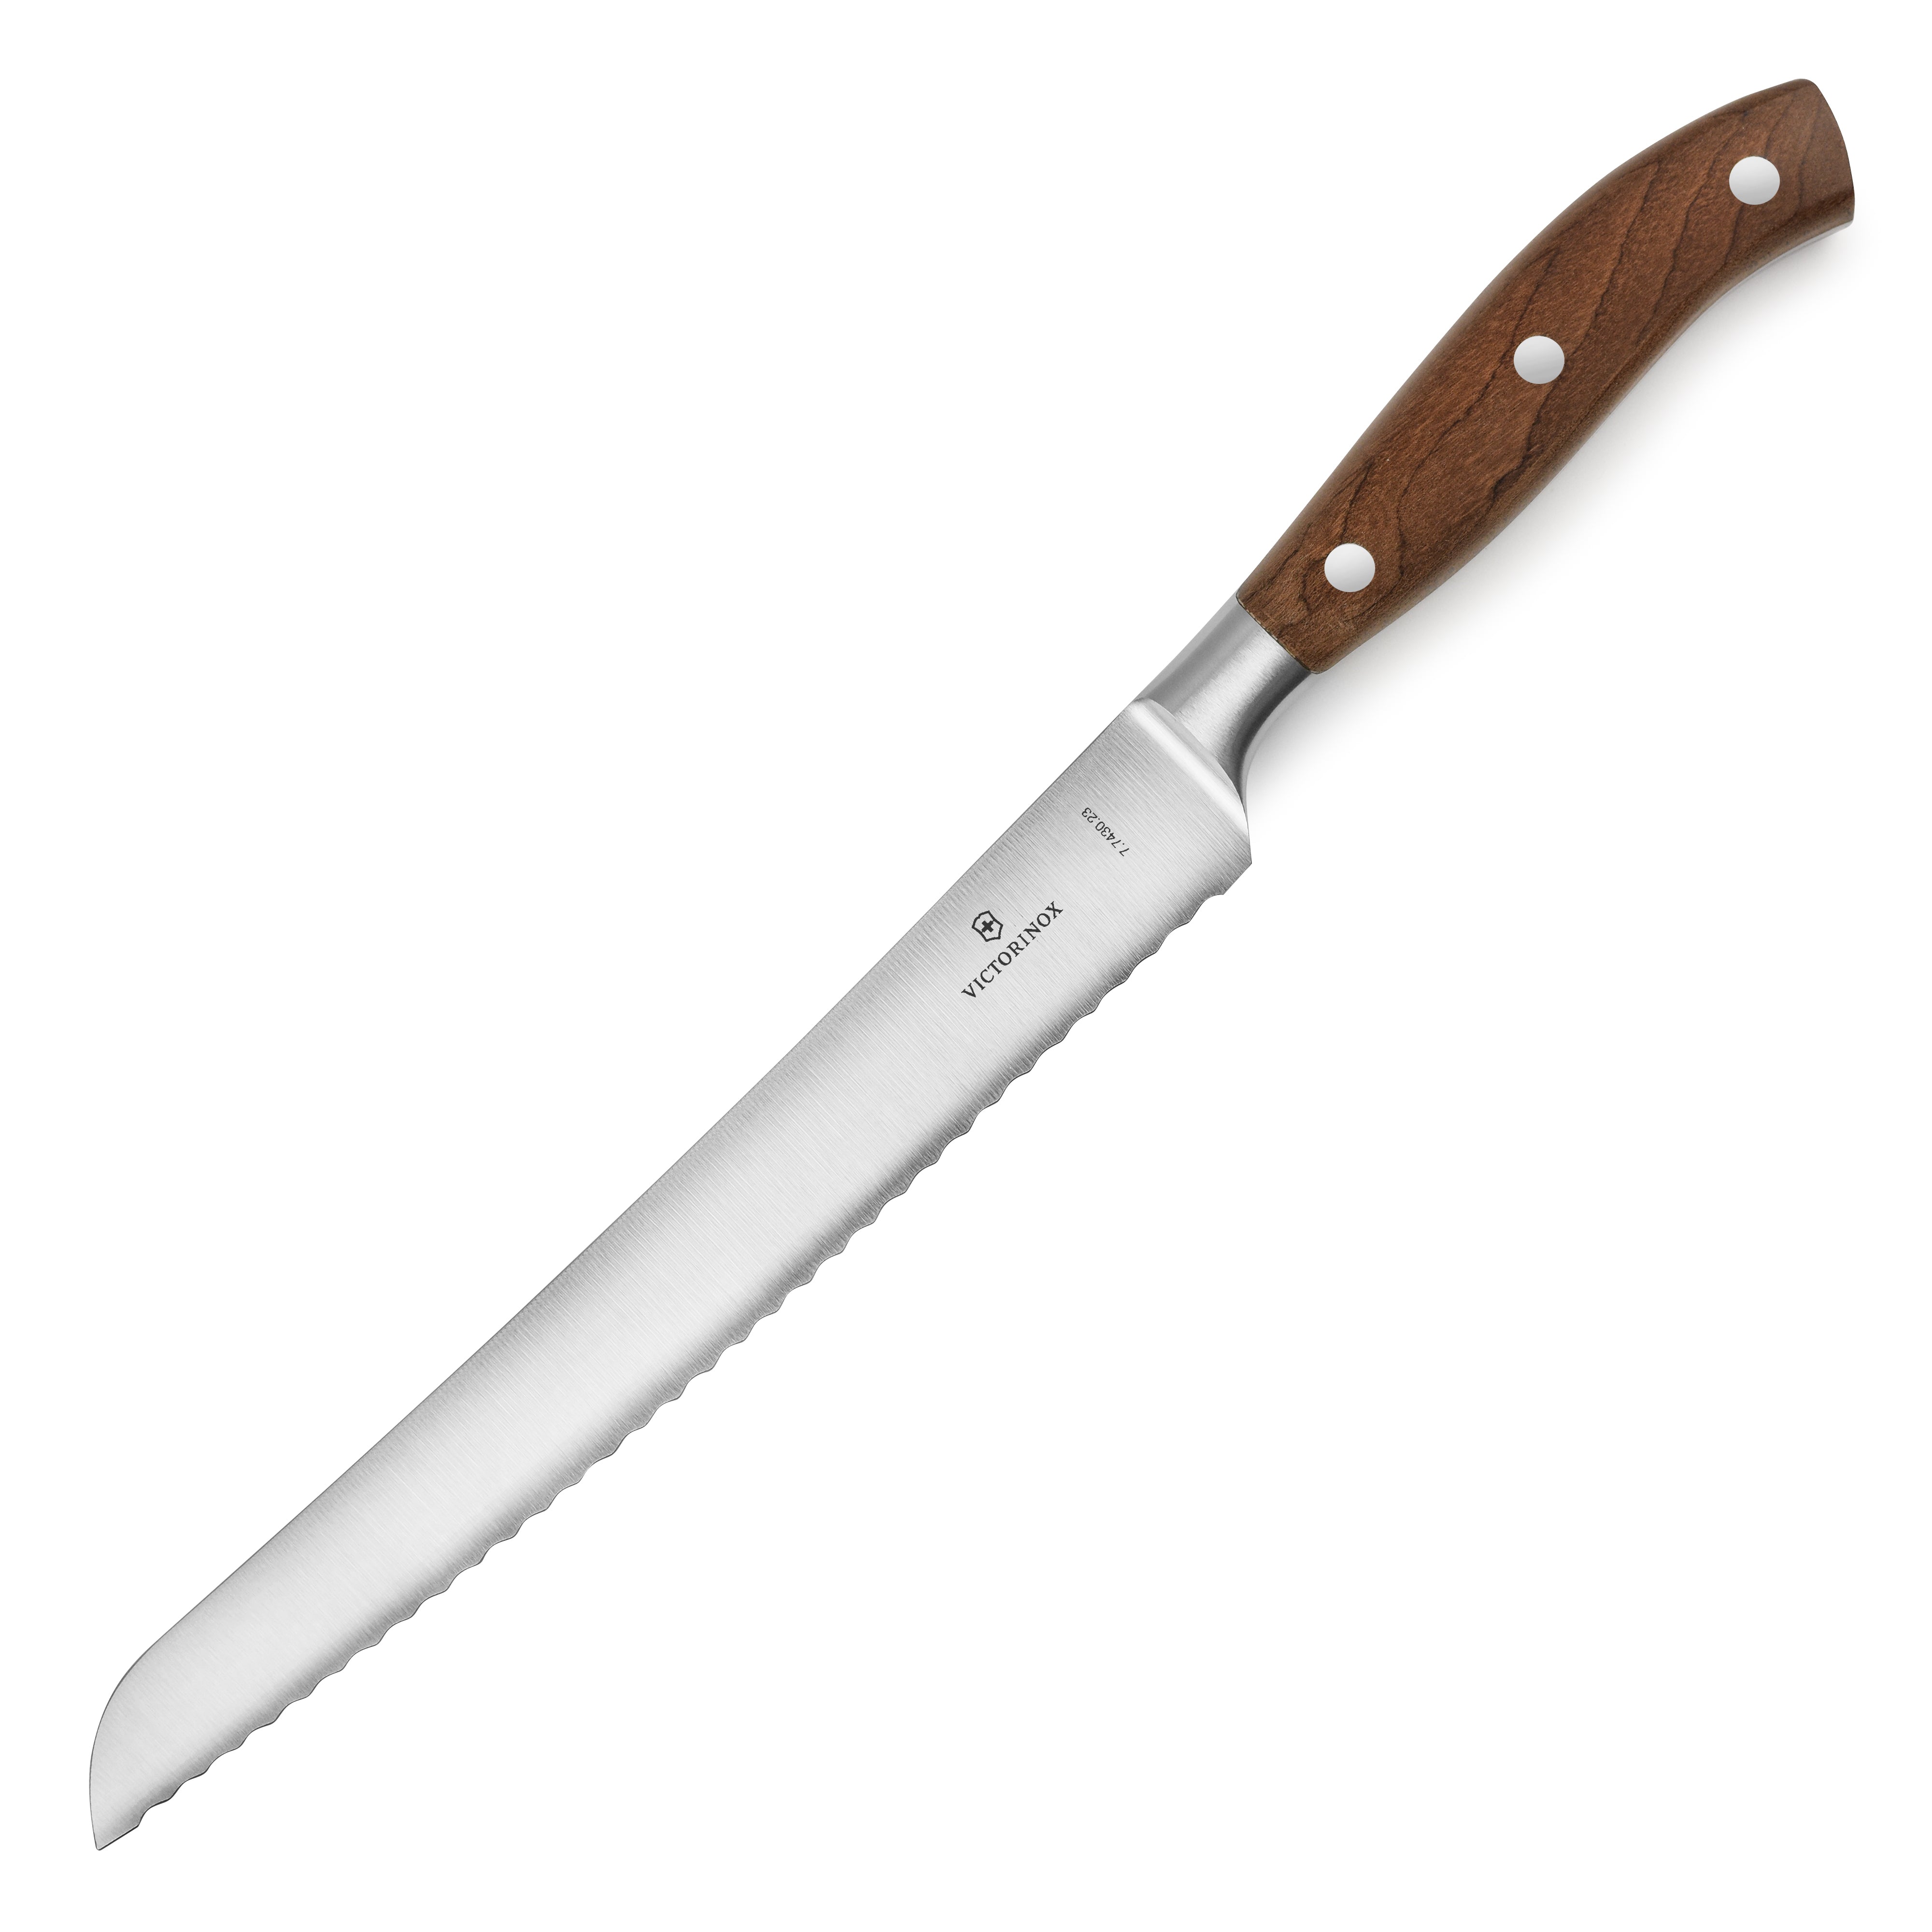 Victorinox Grand Maître Bread and Pastry Knife in Modified Maple